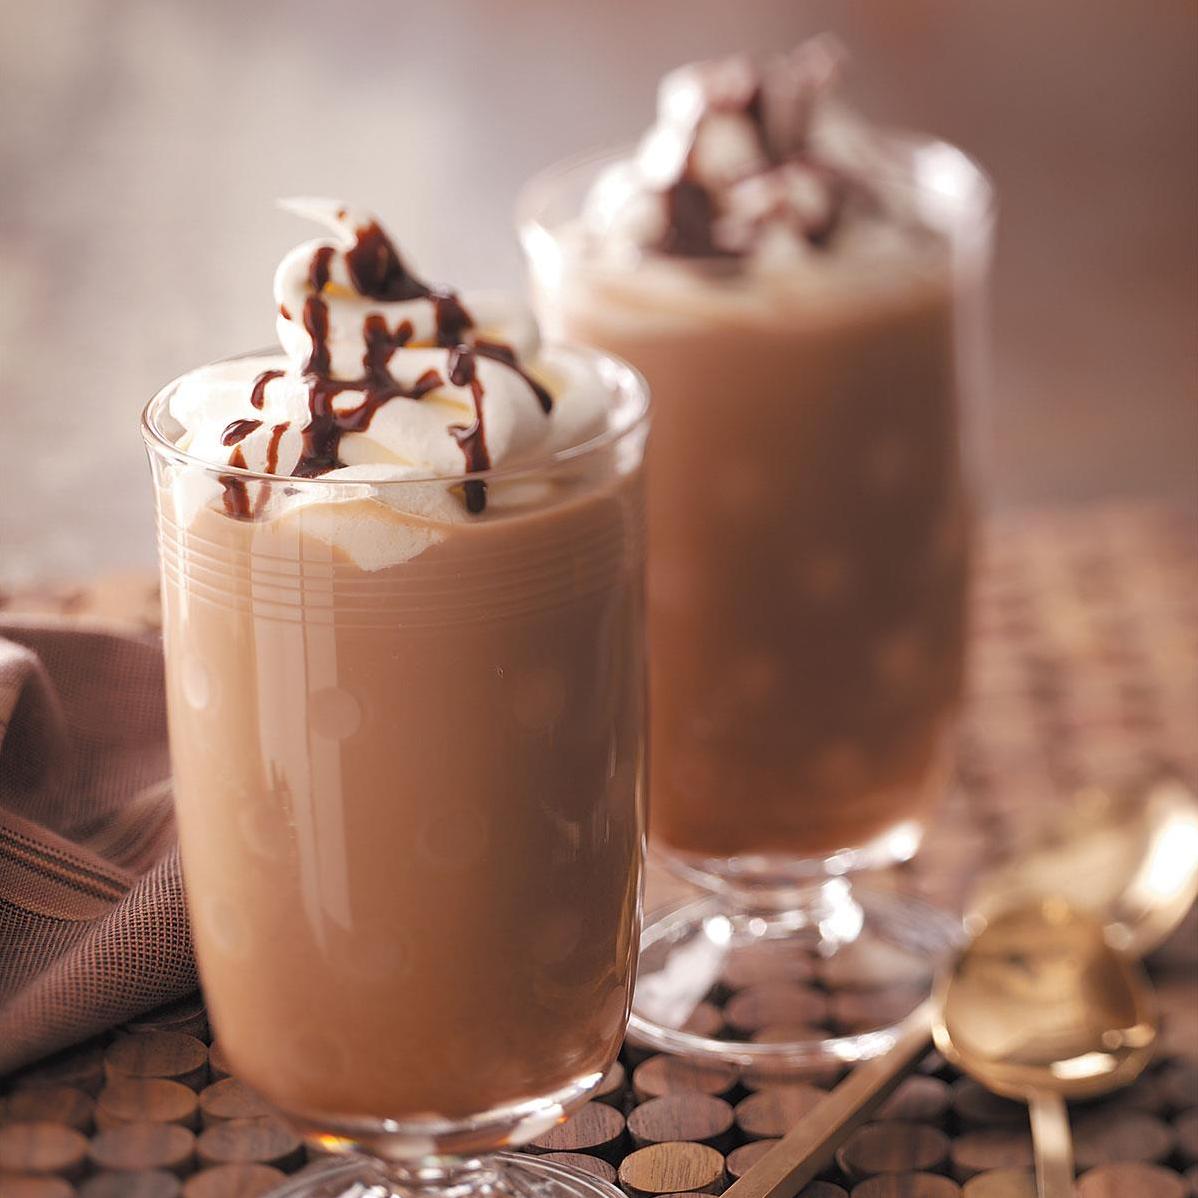  Swirling with chocolatey goodness! #FrappeMochaDelight